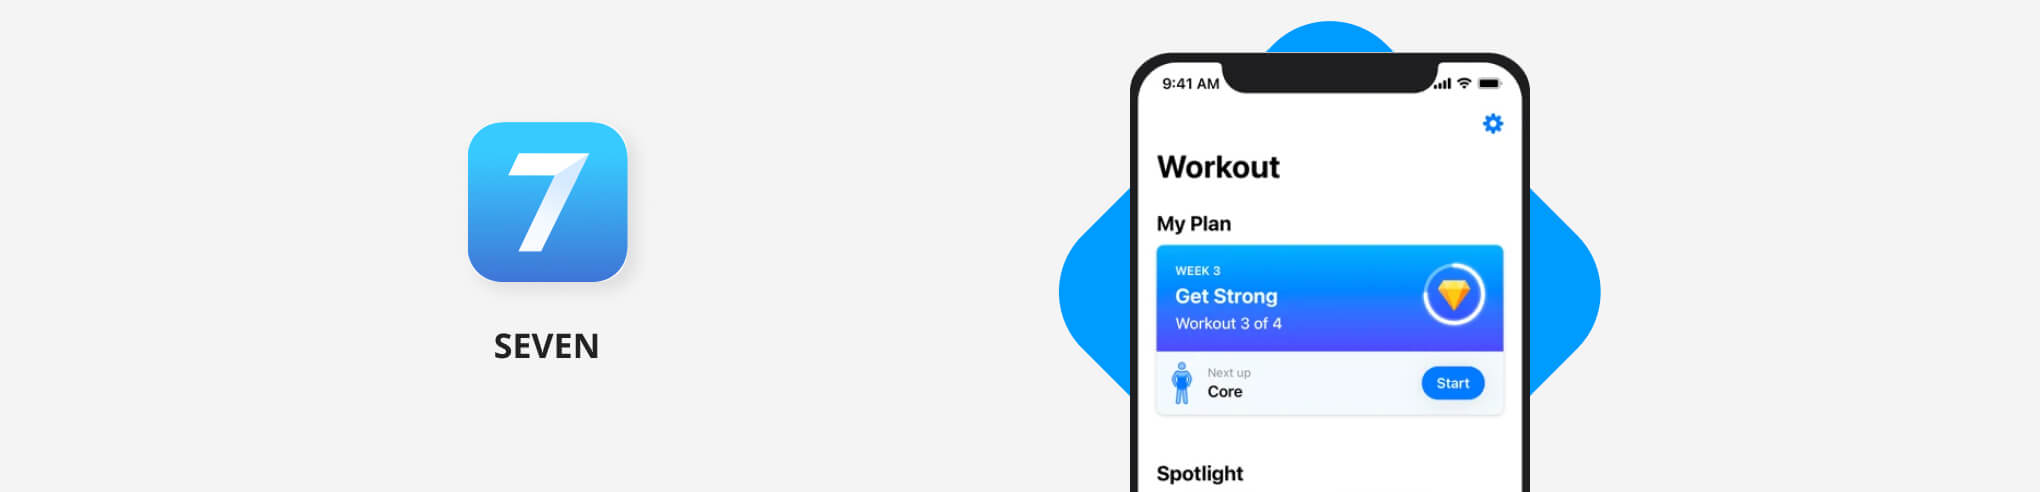 Workout fitness apps